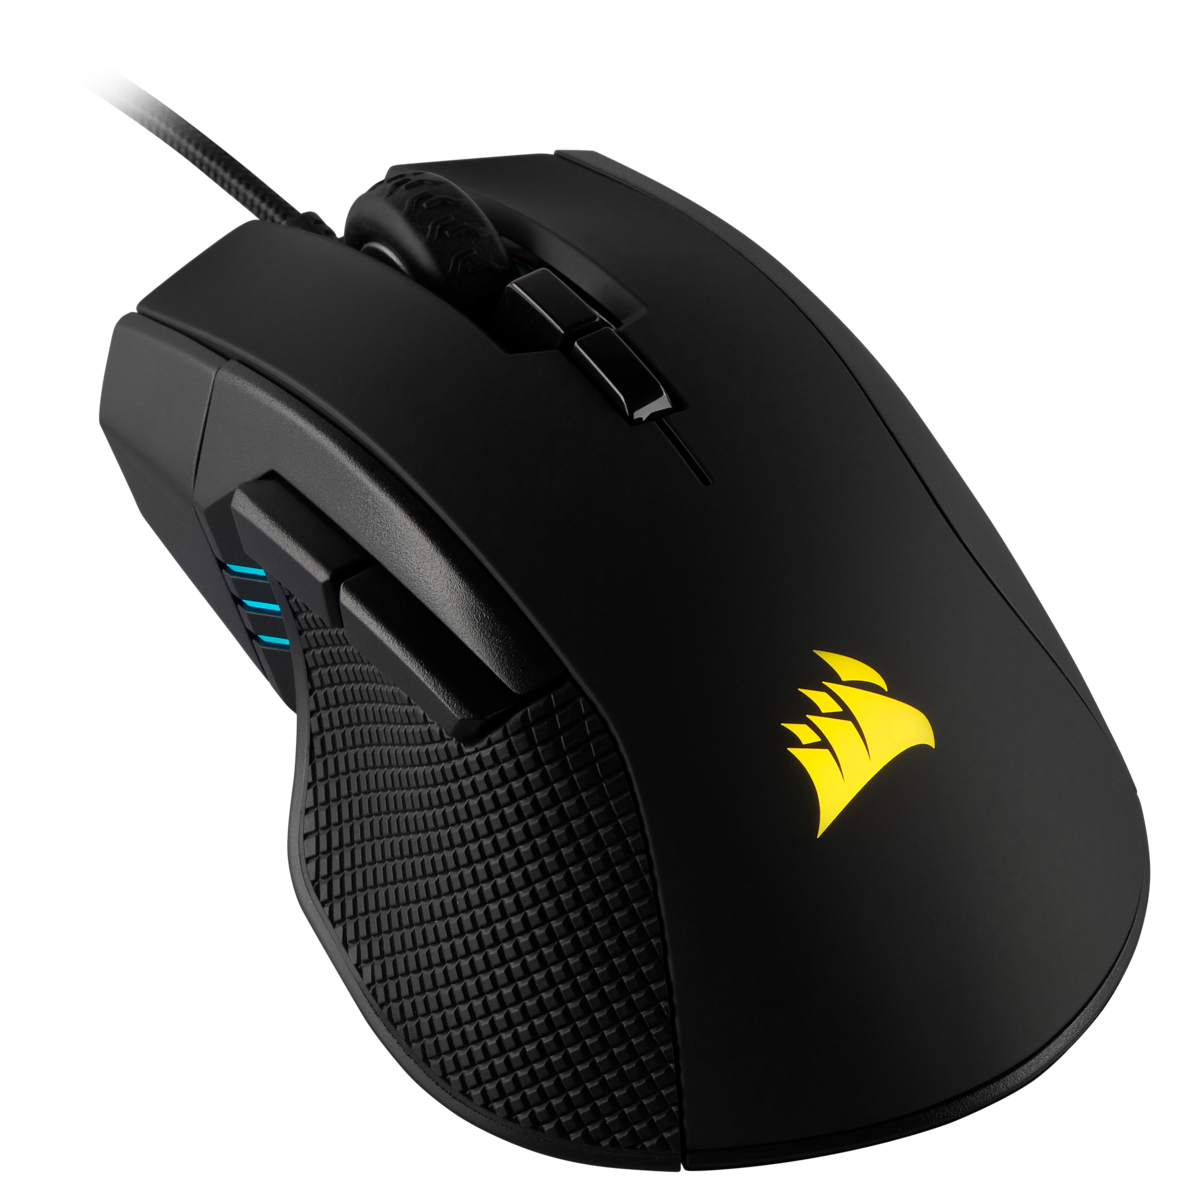 Hands-on: Corsair IronClaw RGB — Class-leading sensor performance at a wallet-friendly price - NotebookCheck.net News